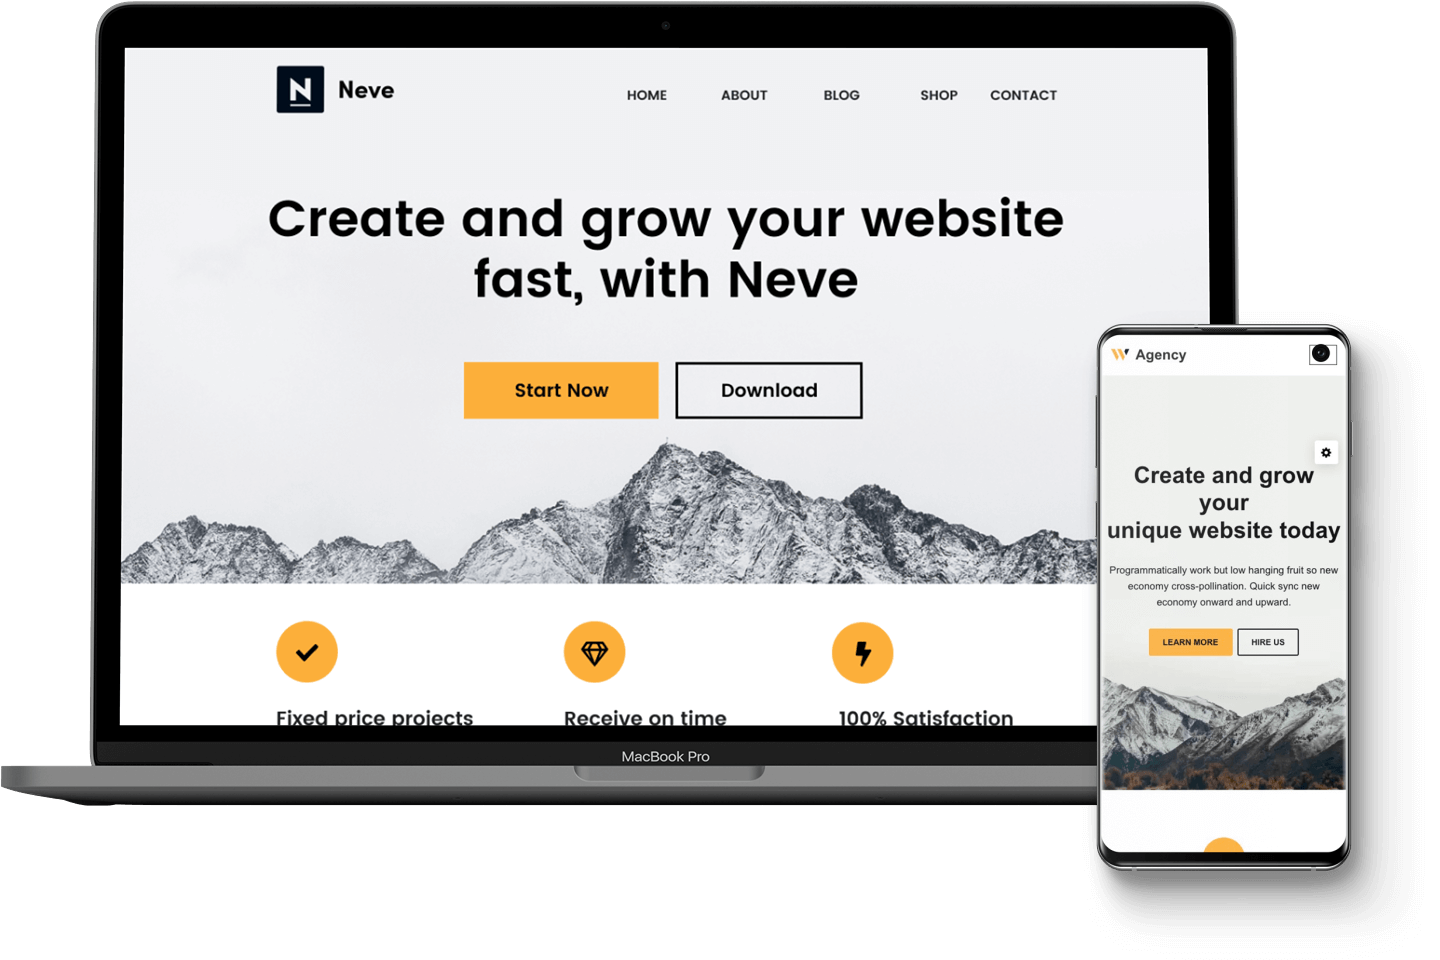 The Neve theme website. This is a lightweight and fast theme that you can use to create a good landing page